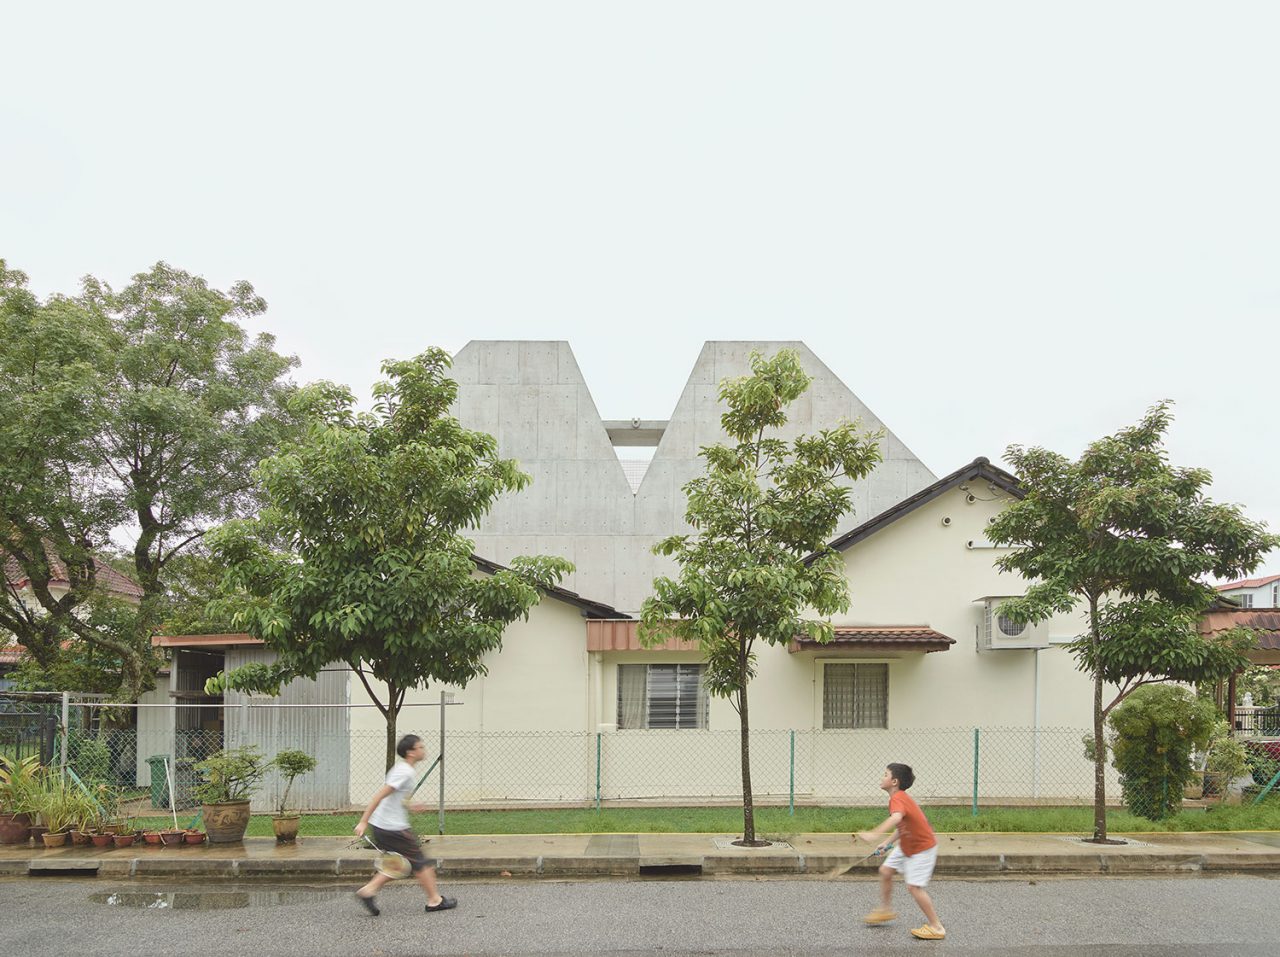 A Simple Terrace House by Pencil Office